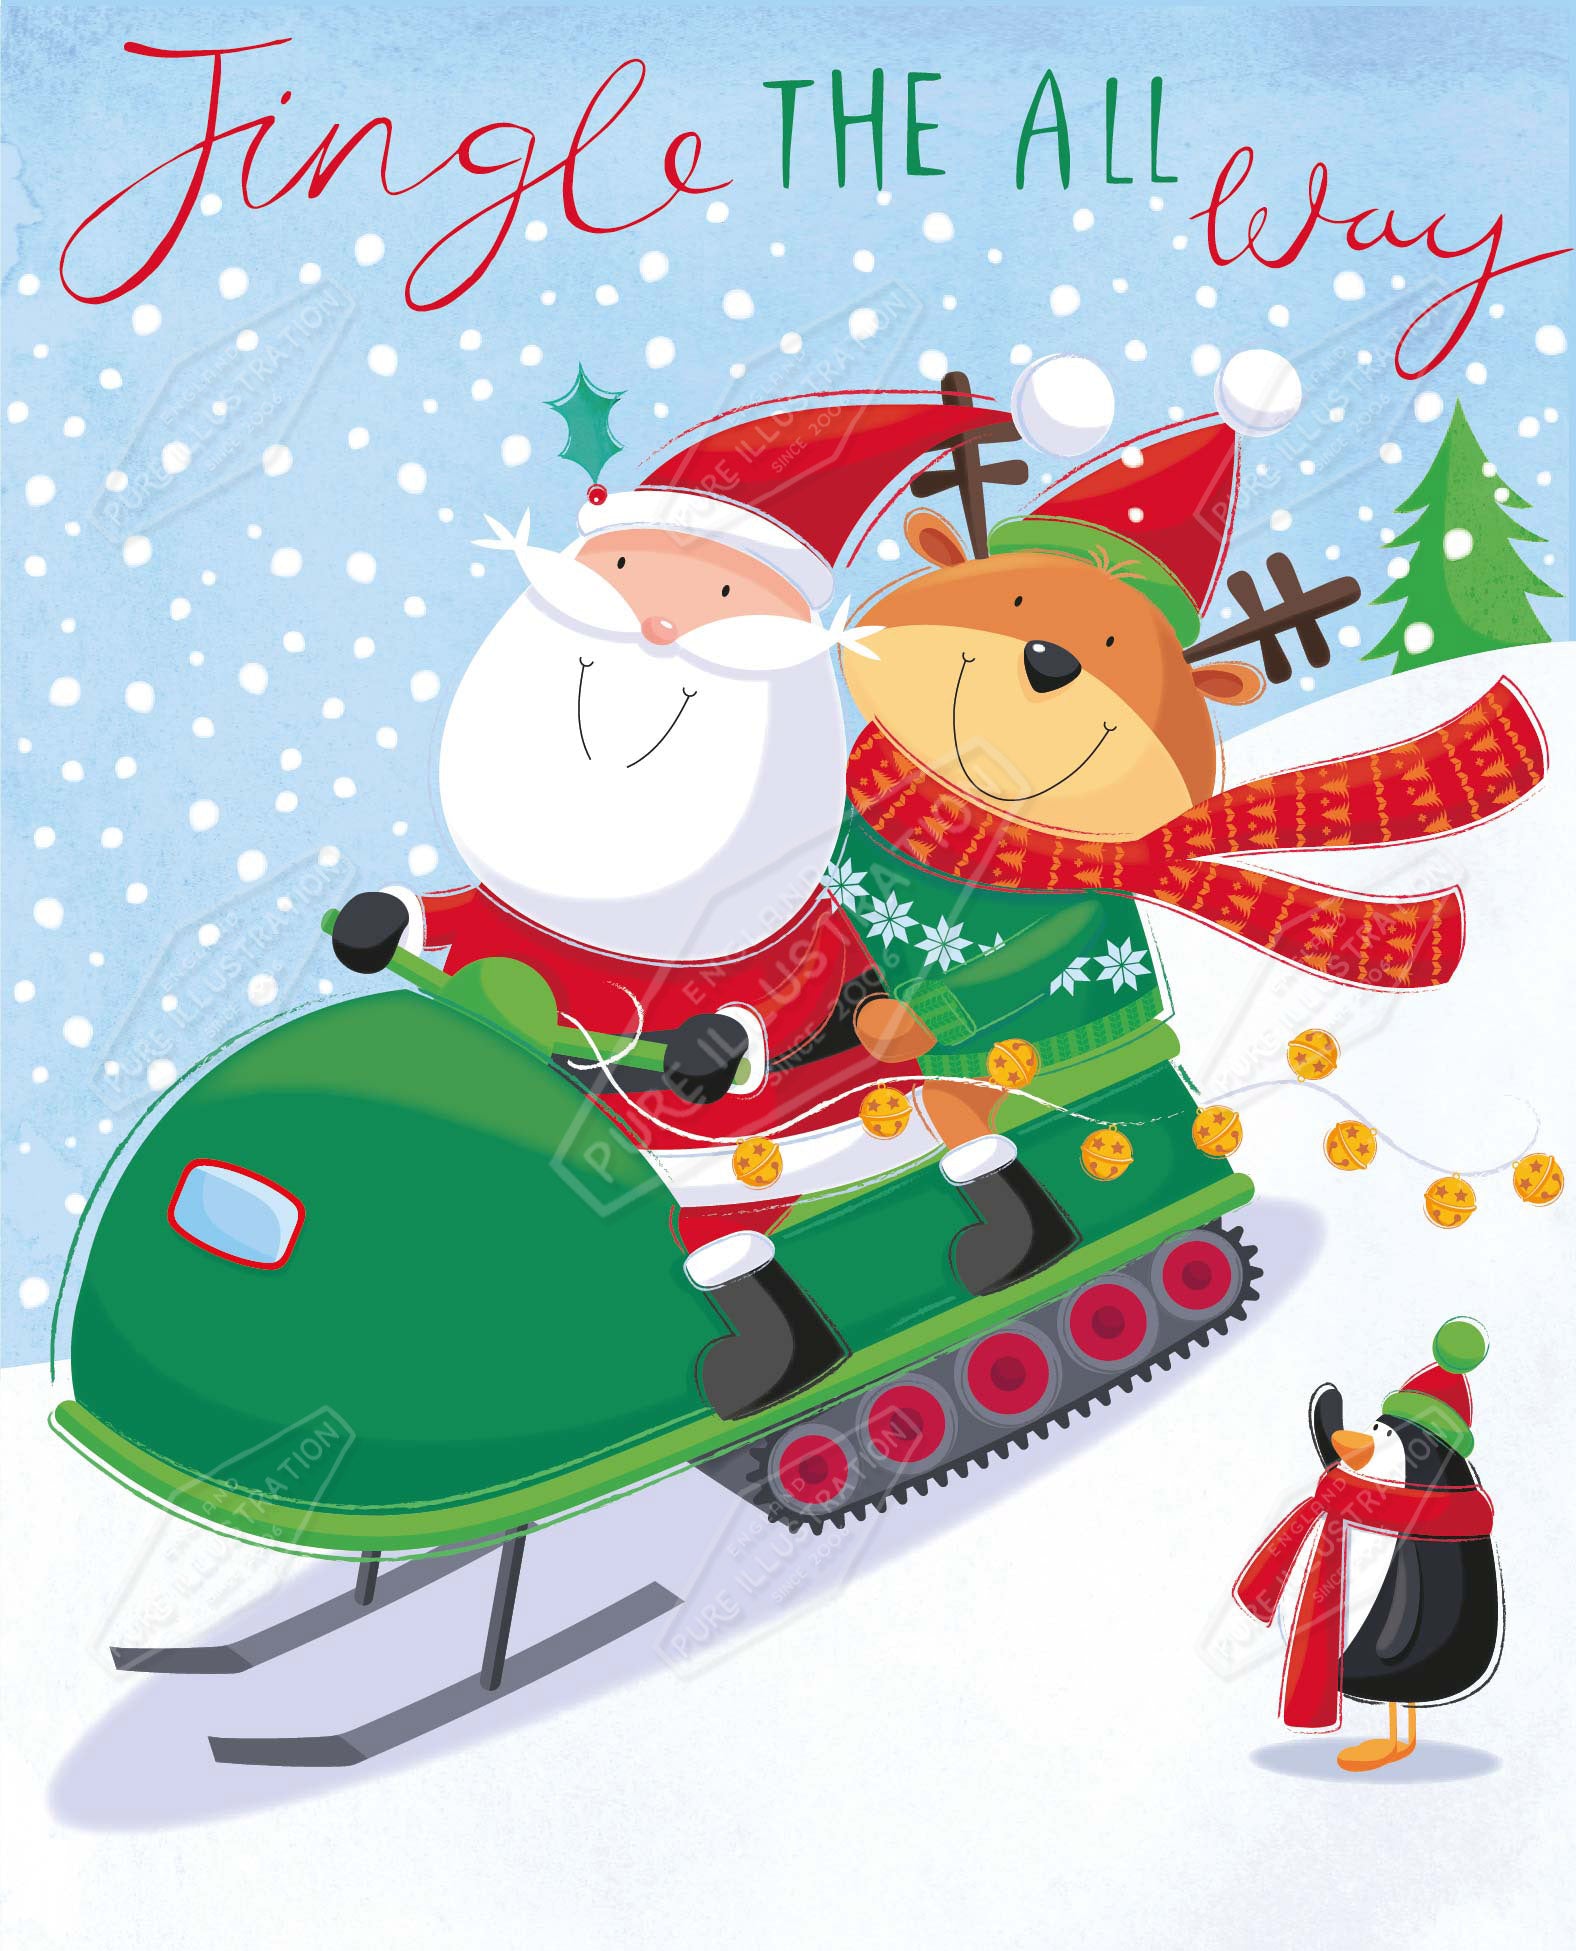 00035097SPI- Sarah Pitt is represented by Pure Art Licensing Agency - Christmas Greeting Card Design